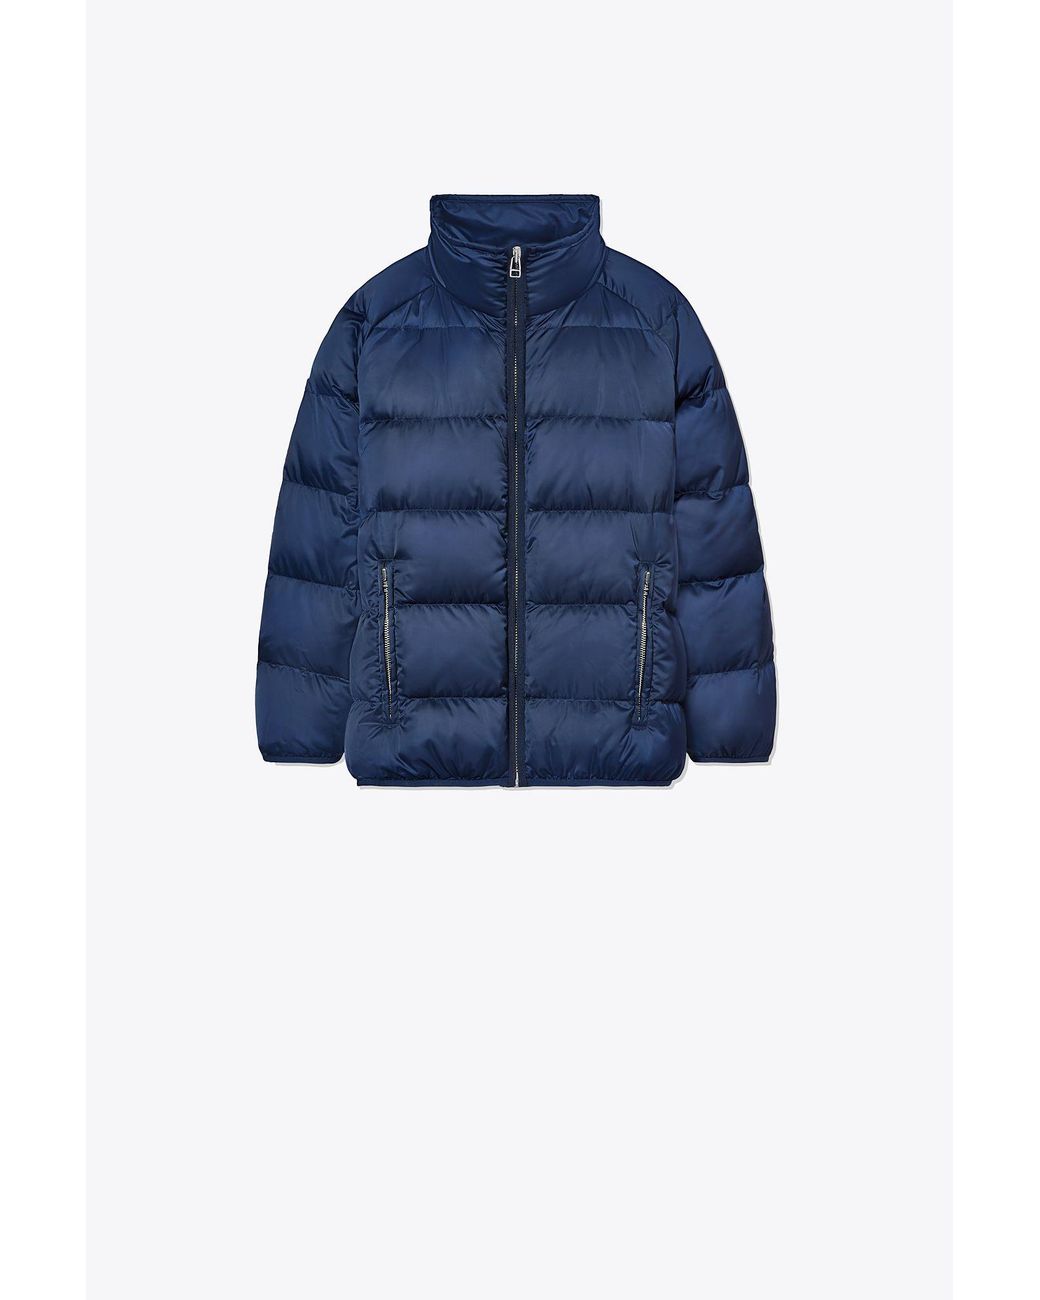 Tory Sport Performance Satin Down Jacket in Blue | Lyst